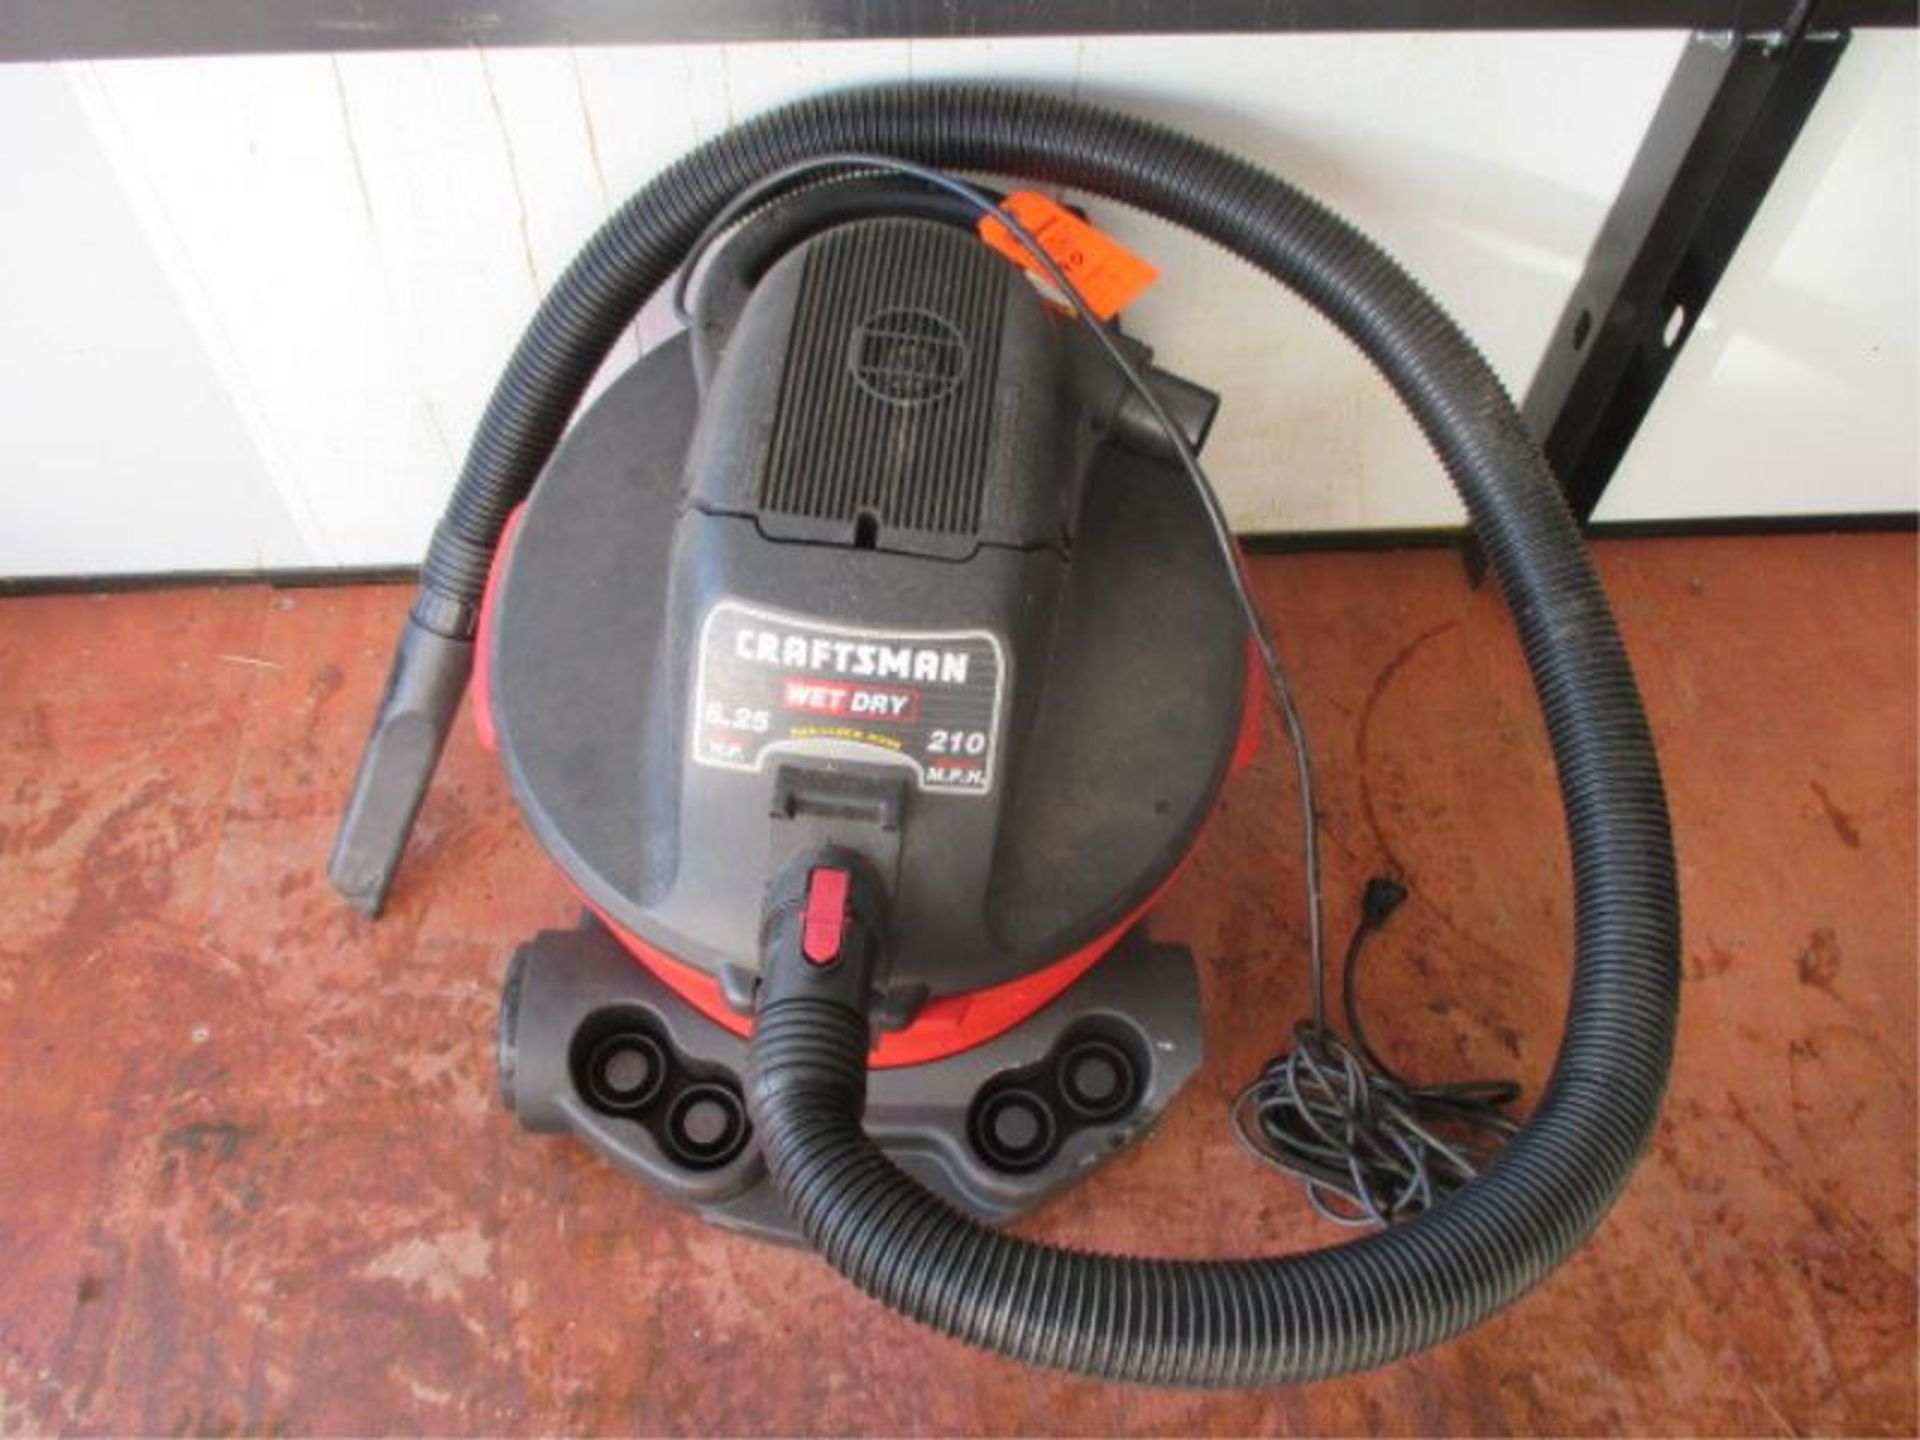 Crafsman Wet / Dry Vac, 16 Gallon, 6.25 Peak HP, 210 Blower MPH, Red 210 Blower MPH, Red - Image 2 of 5